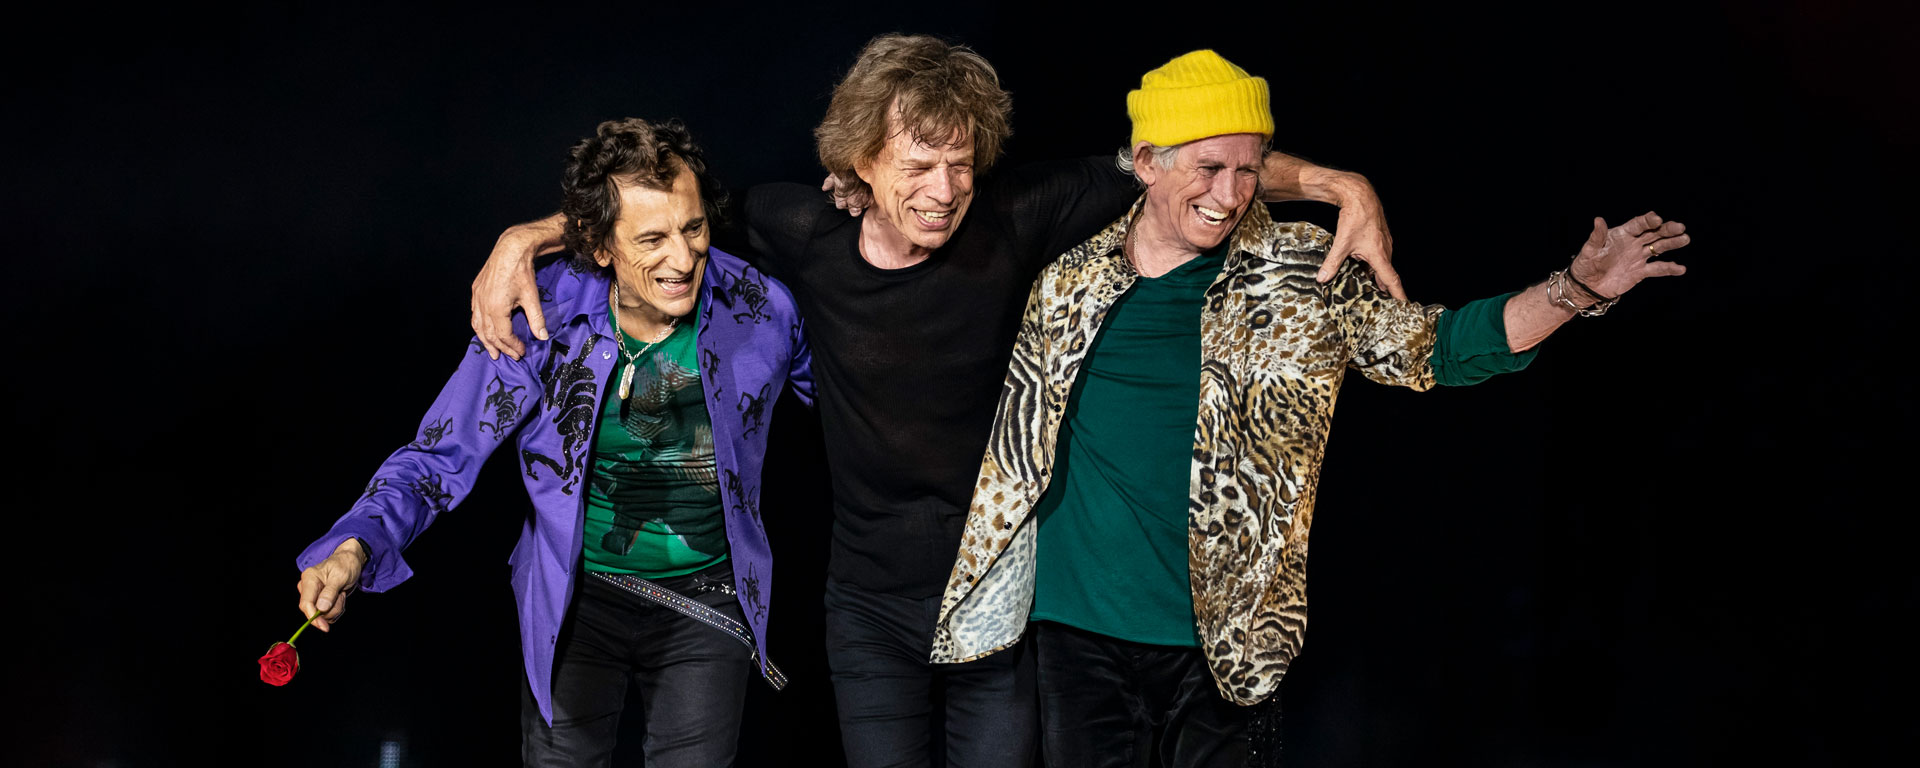 Rolling Stones courtesy Greenhouse Talent